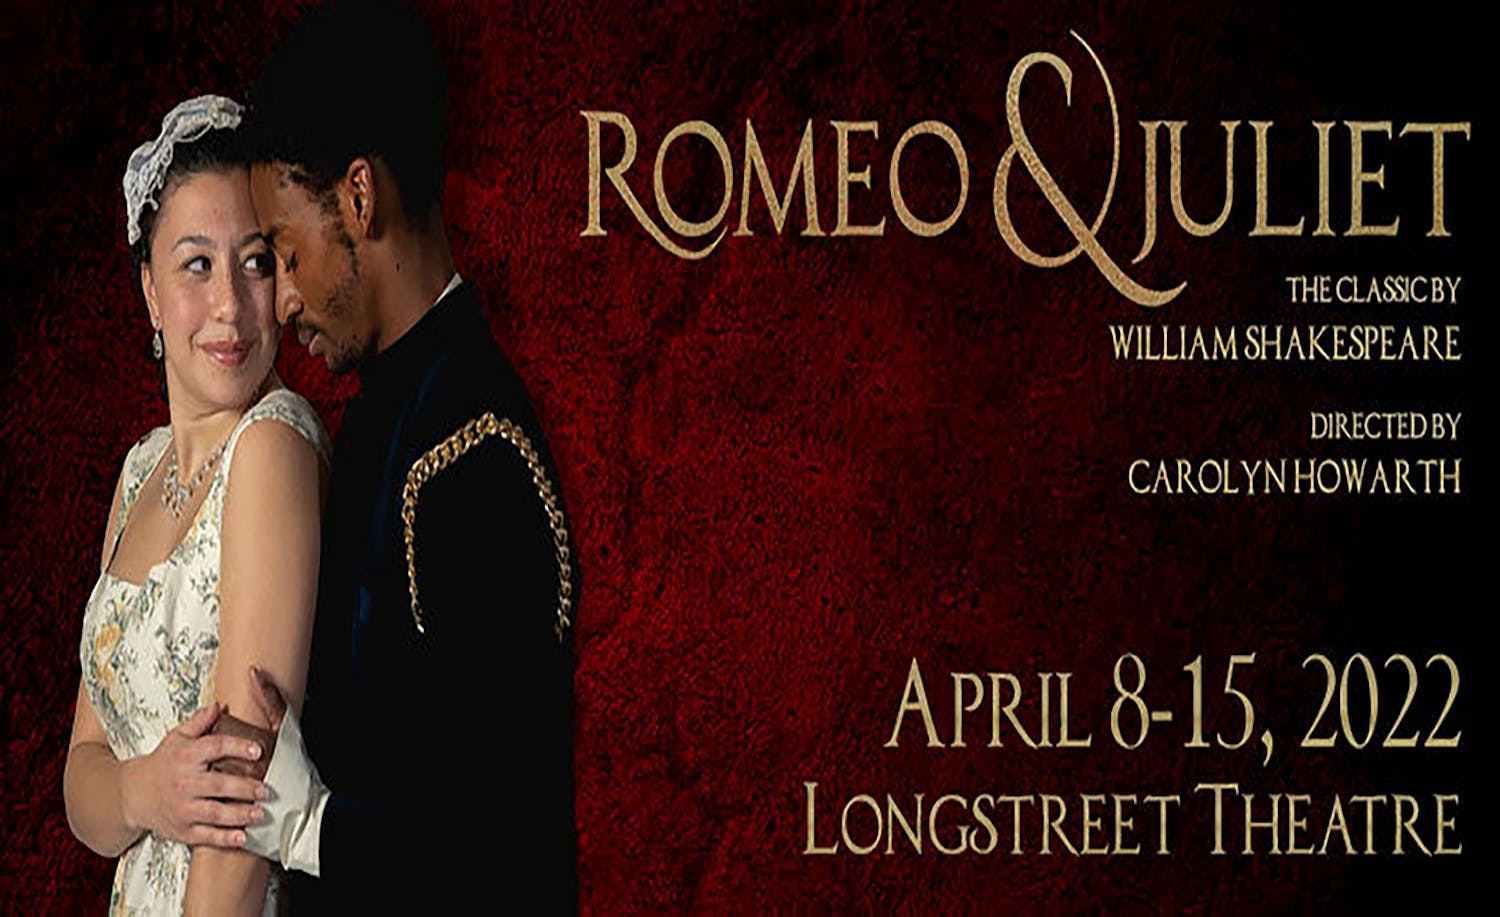 ɫɫƵ Theatre's production of Romeo and Juliet will be performed at the Longstreet Theater from April 8 through April 15, 2022. The university's theatre program will conclude this semester with William Shakespeare’s drama a Romeo and Juliet.